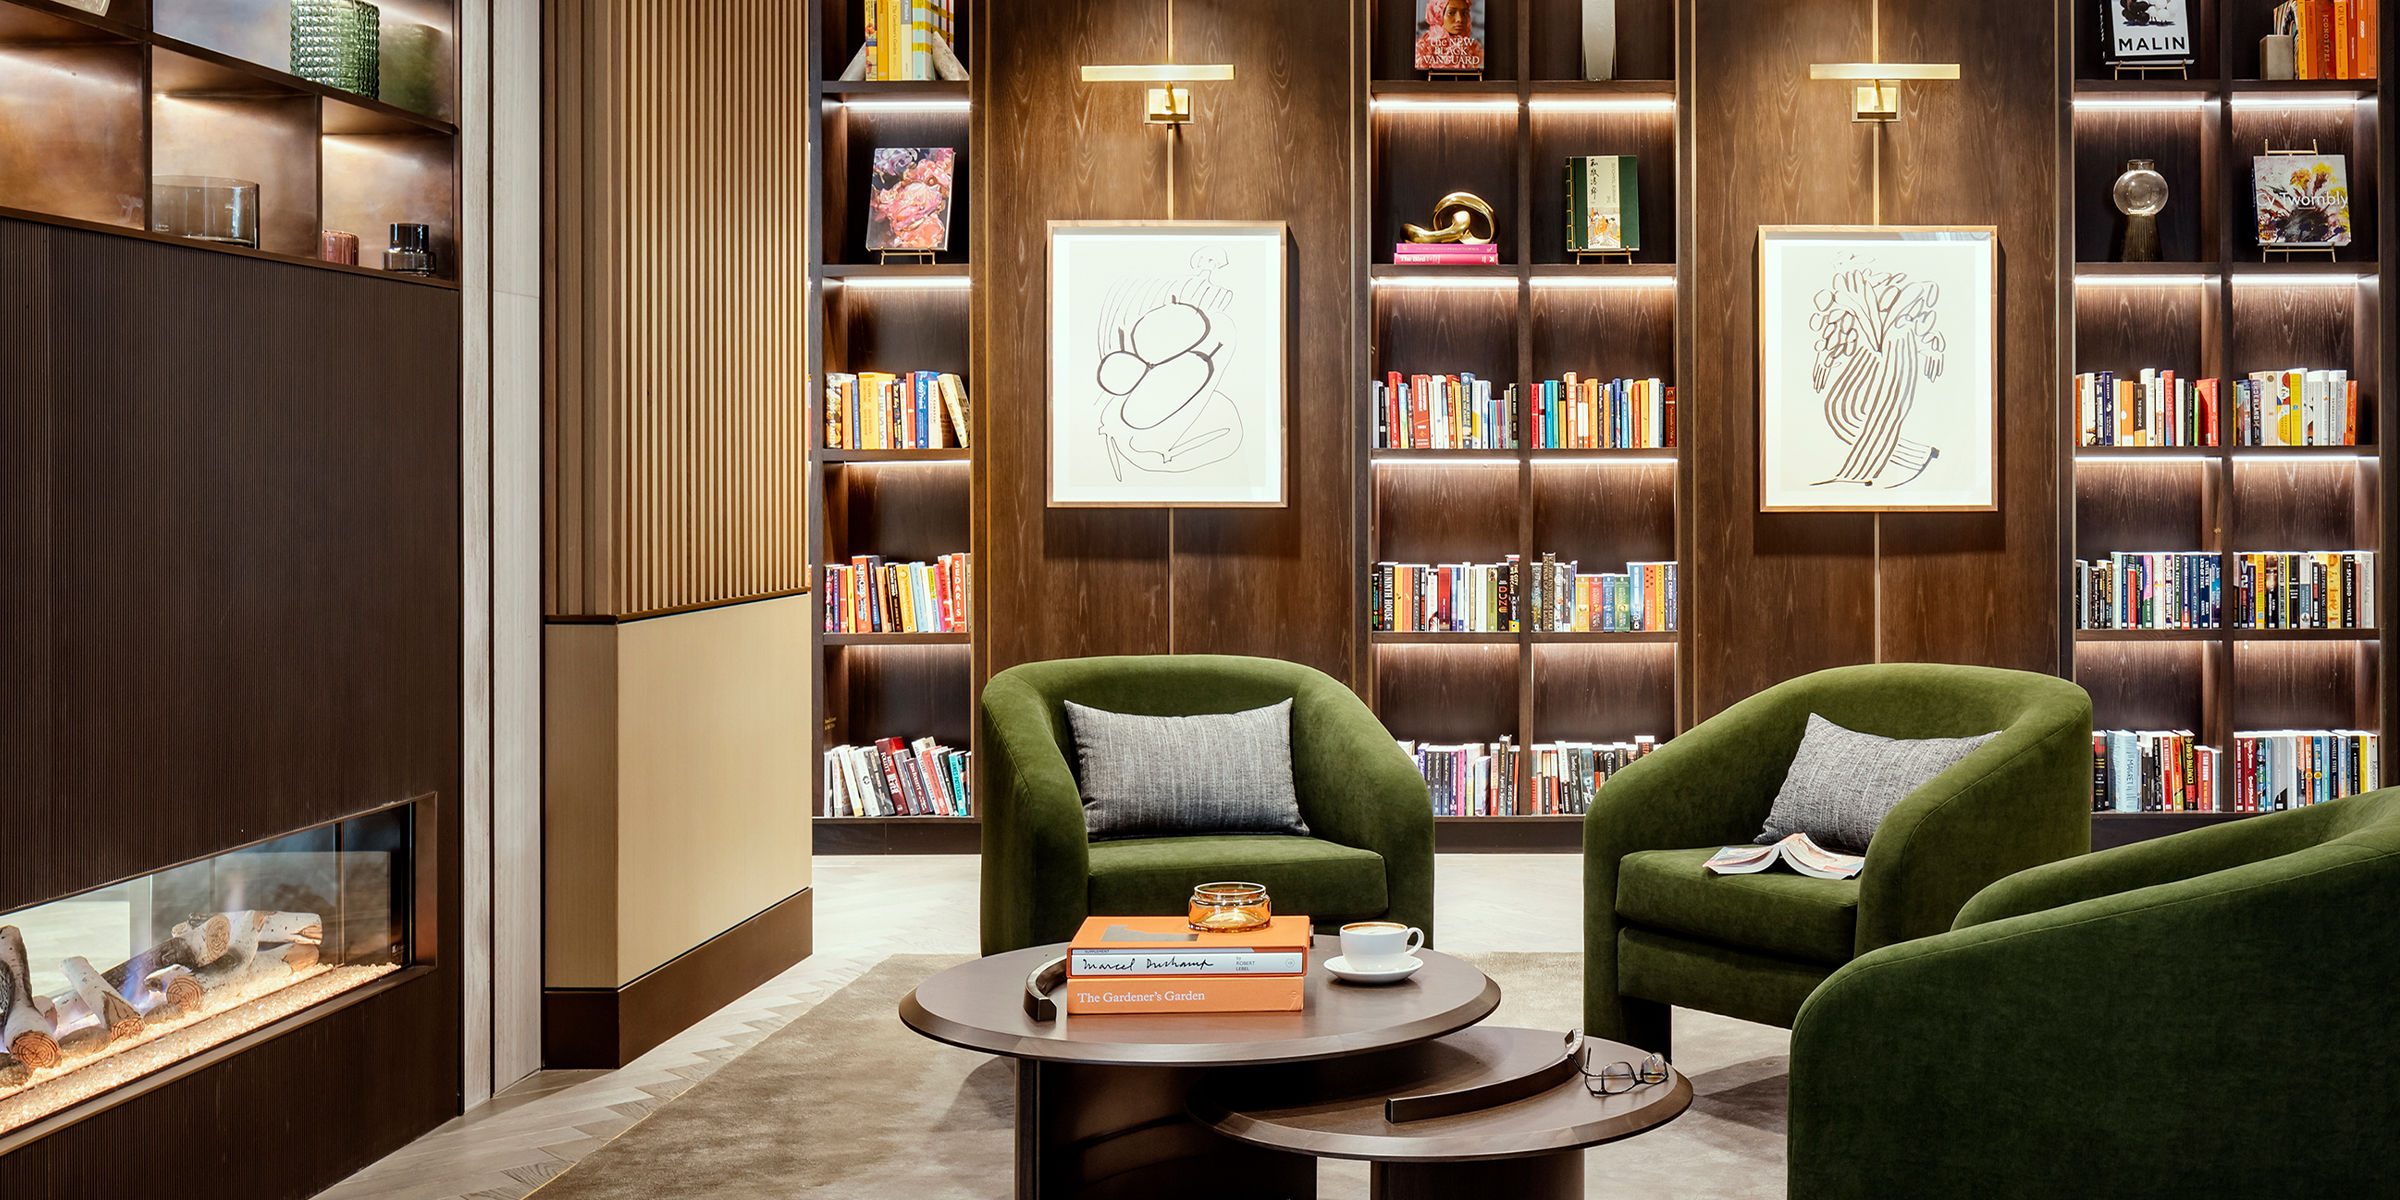 Coterie's modern library with comfortable seating, lit-up bookshelves, and modern abstract art on the walls.